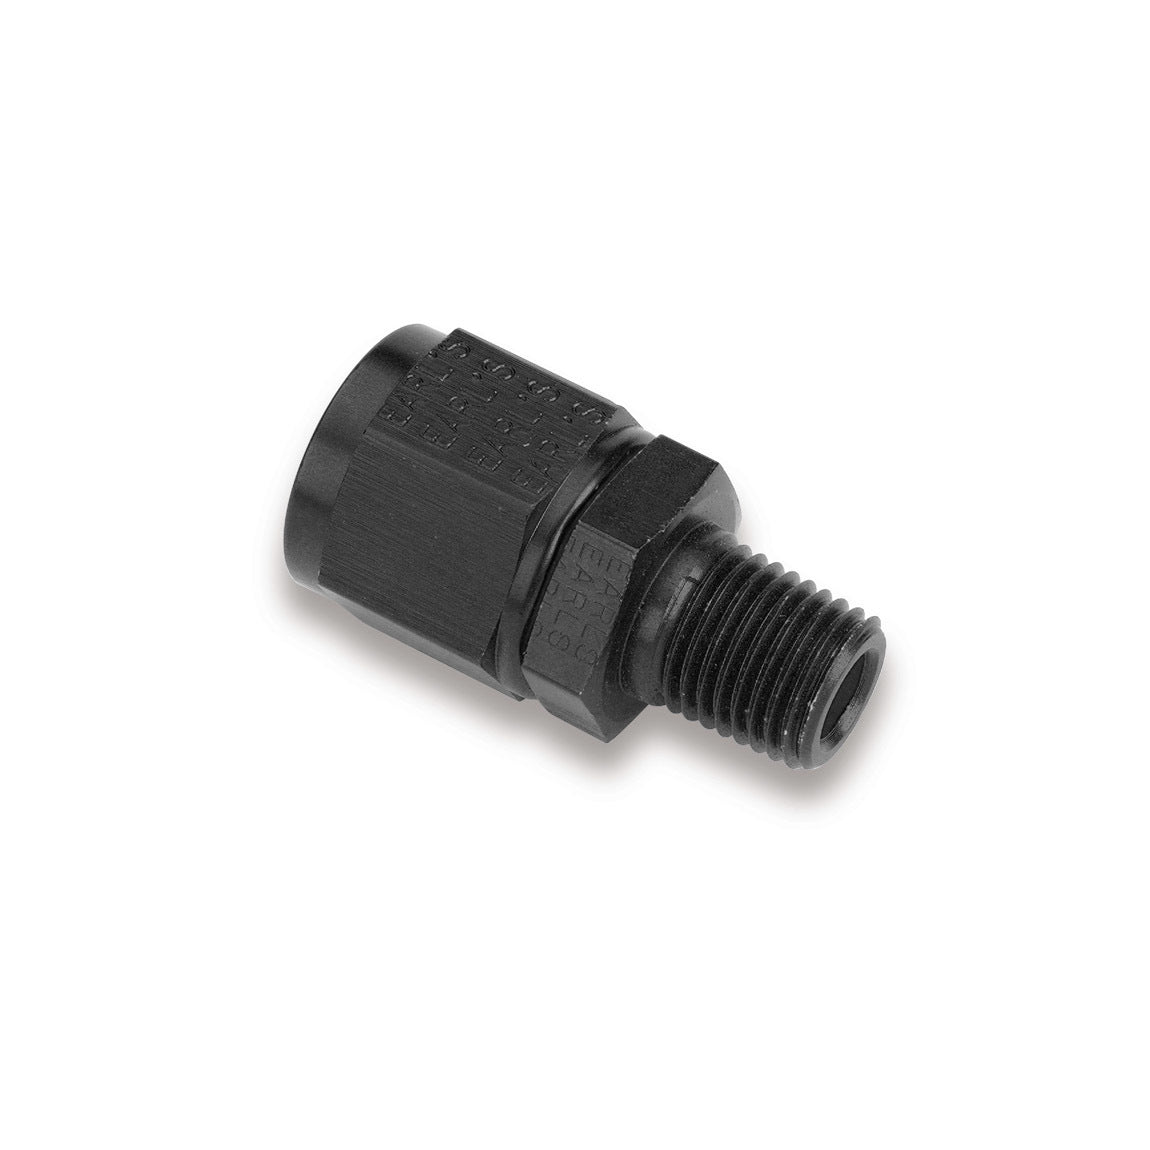 Adapter Fitting 6an Fem Swivel to Male 1/4 NPT